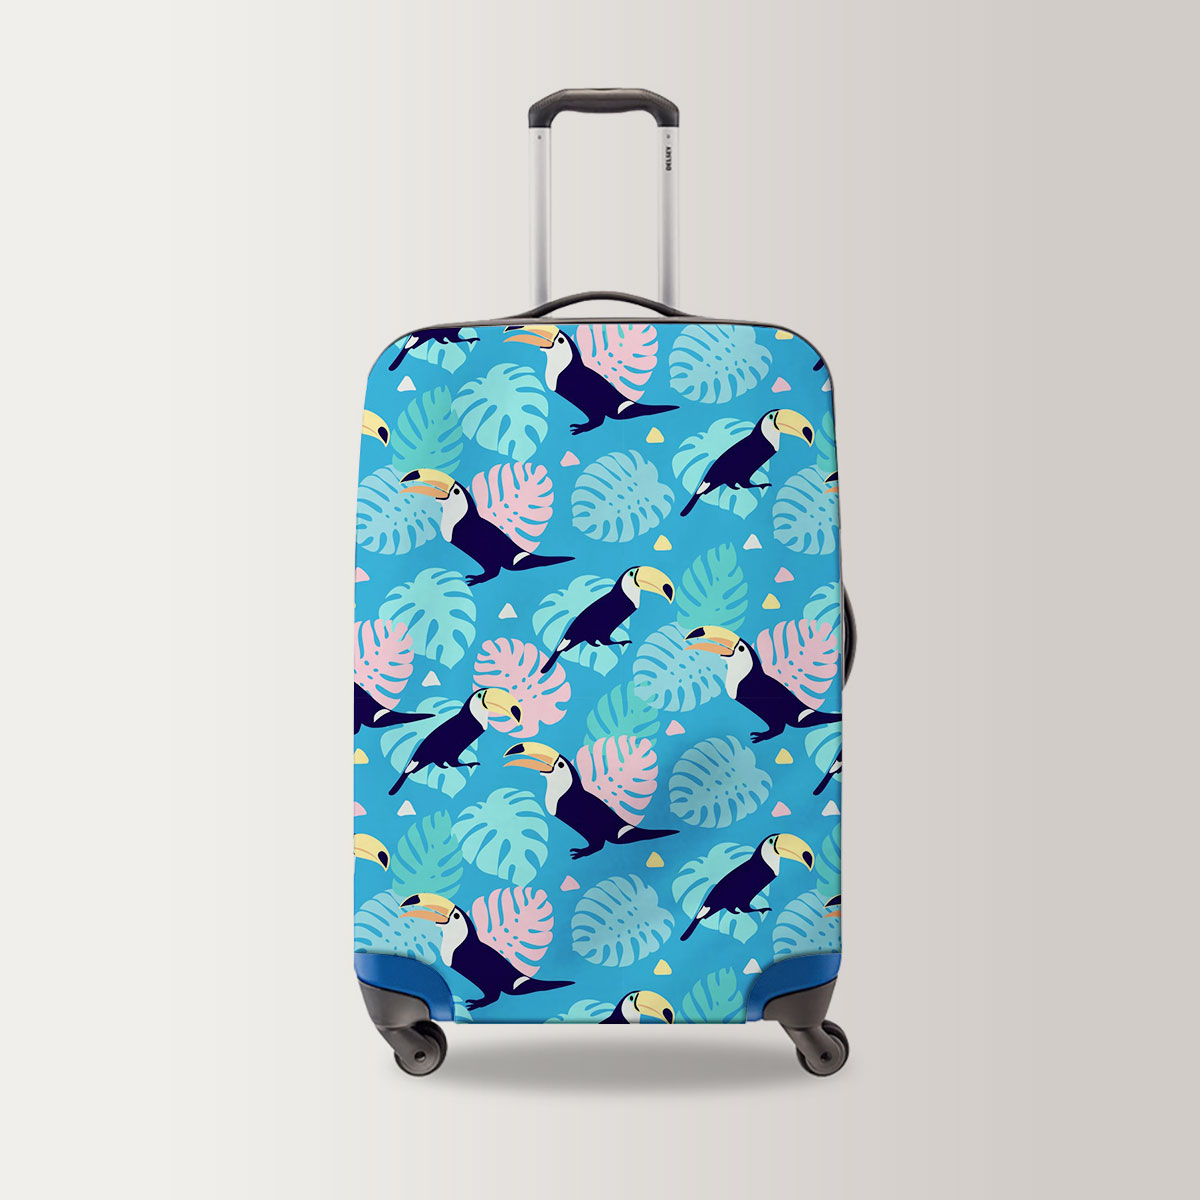 Toucan On Blue Background Luggage Bag